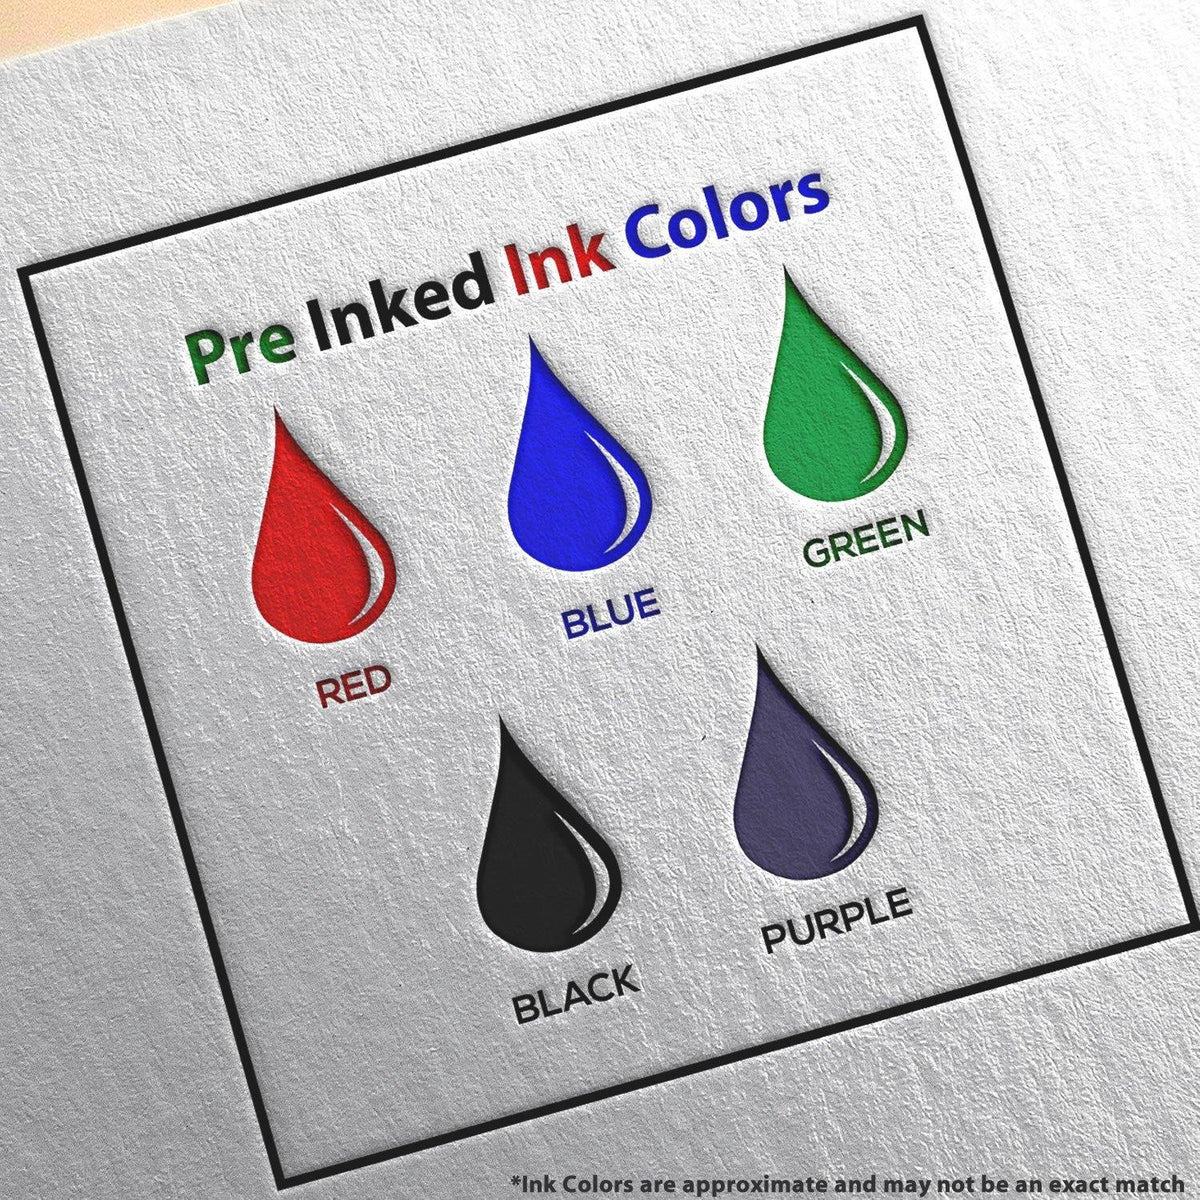 Slim Pre-Inked Faxed on Stamp Ink Color Options